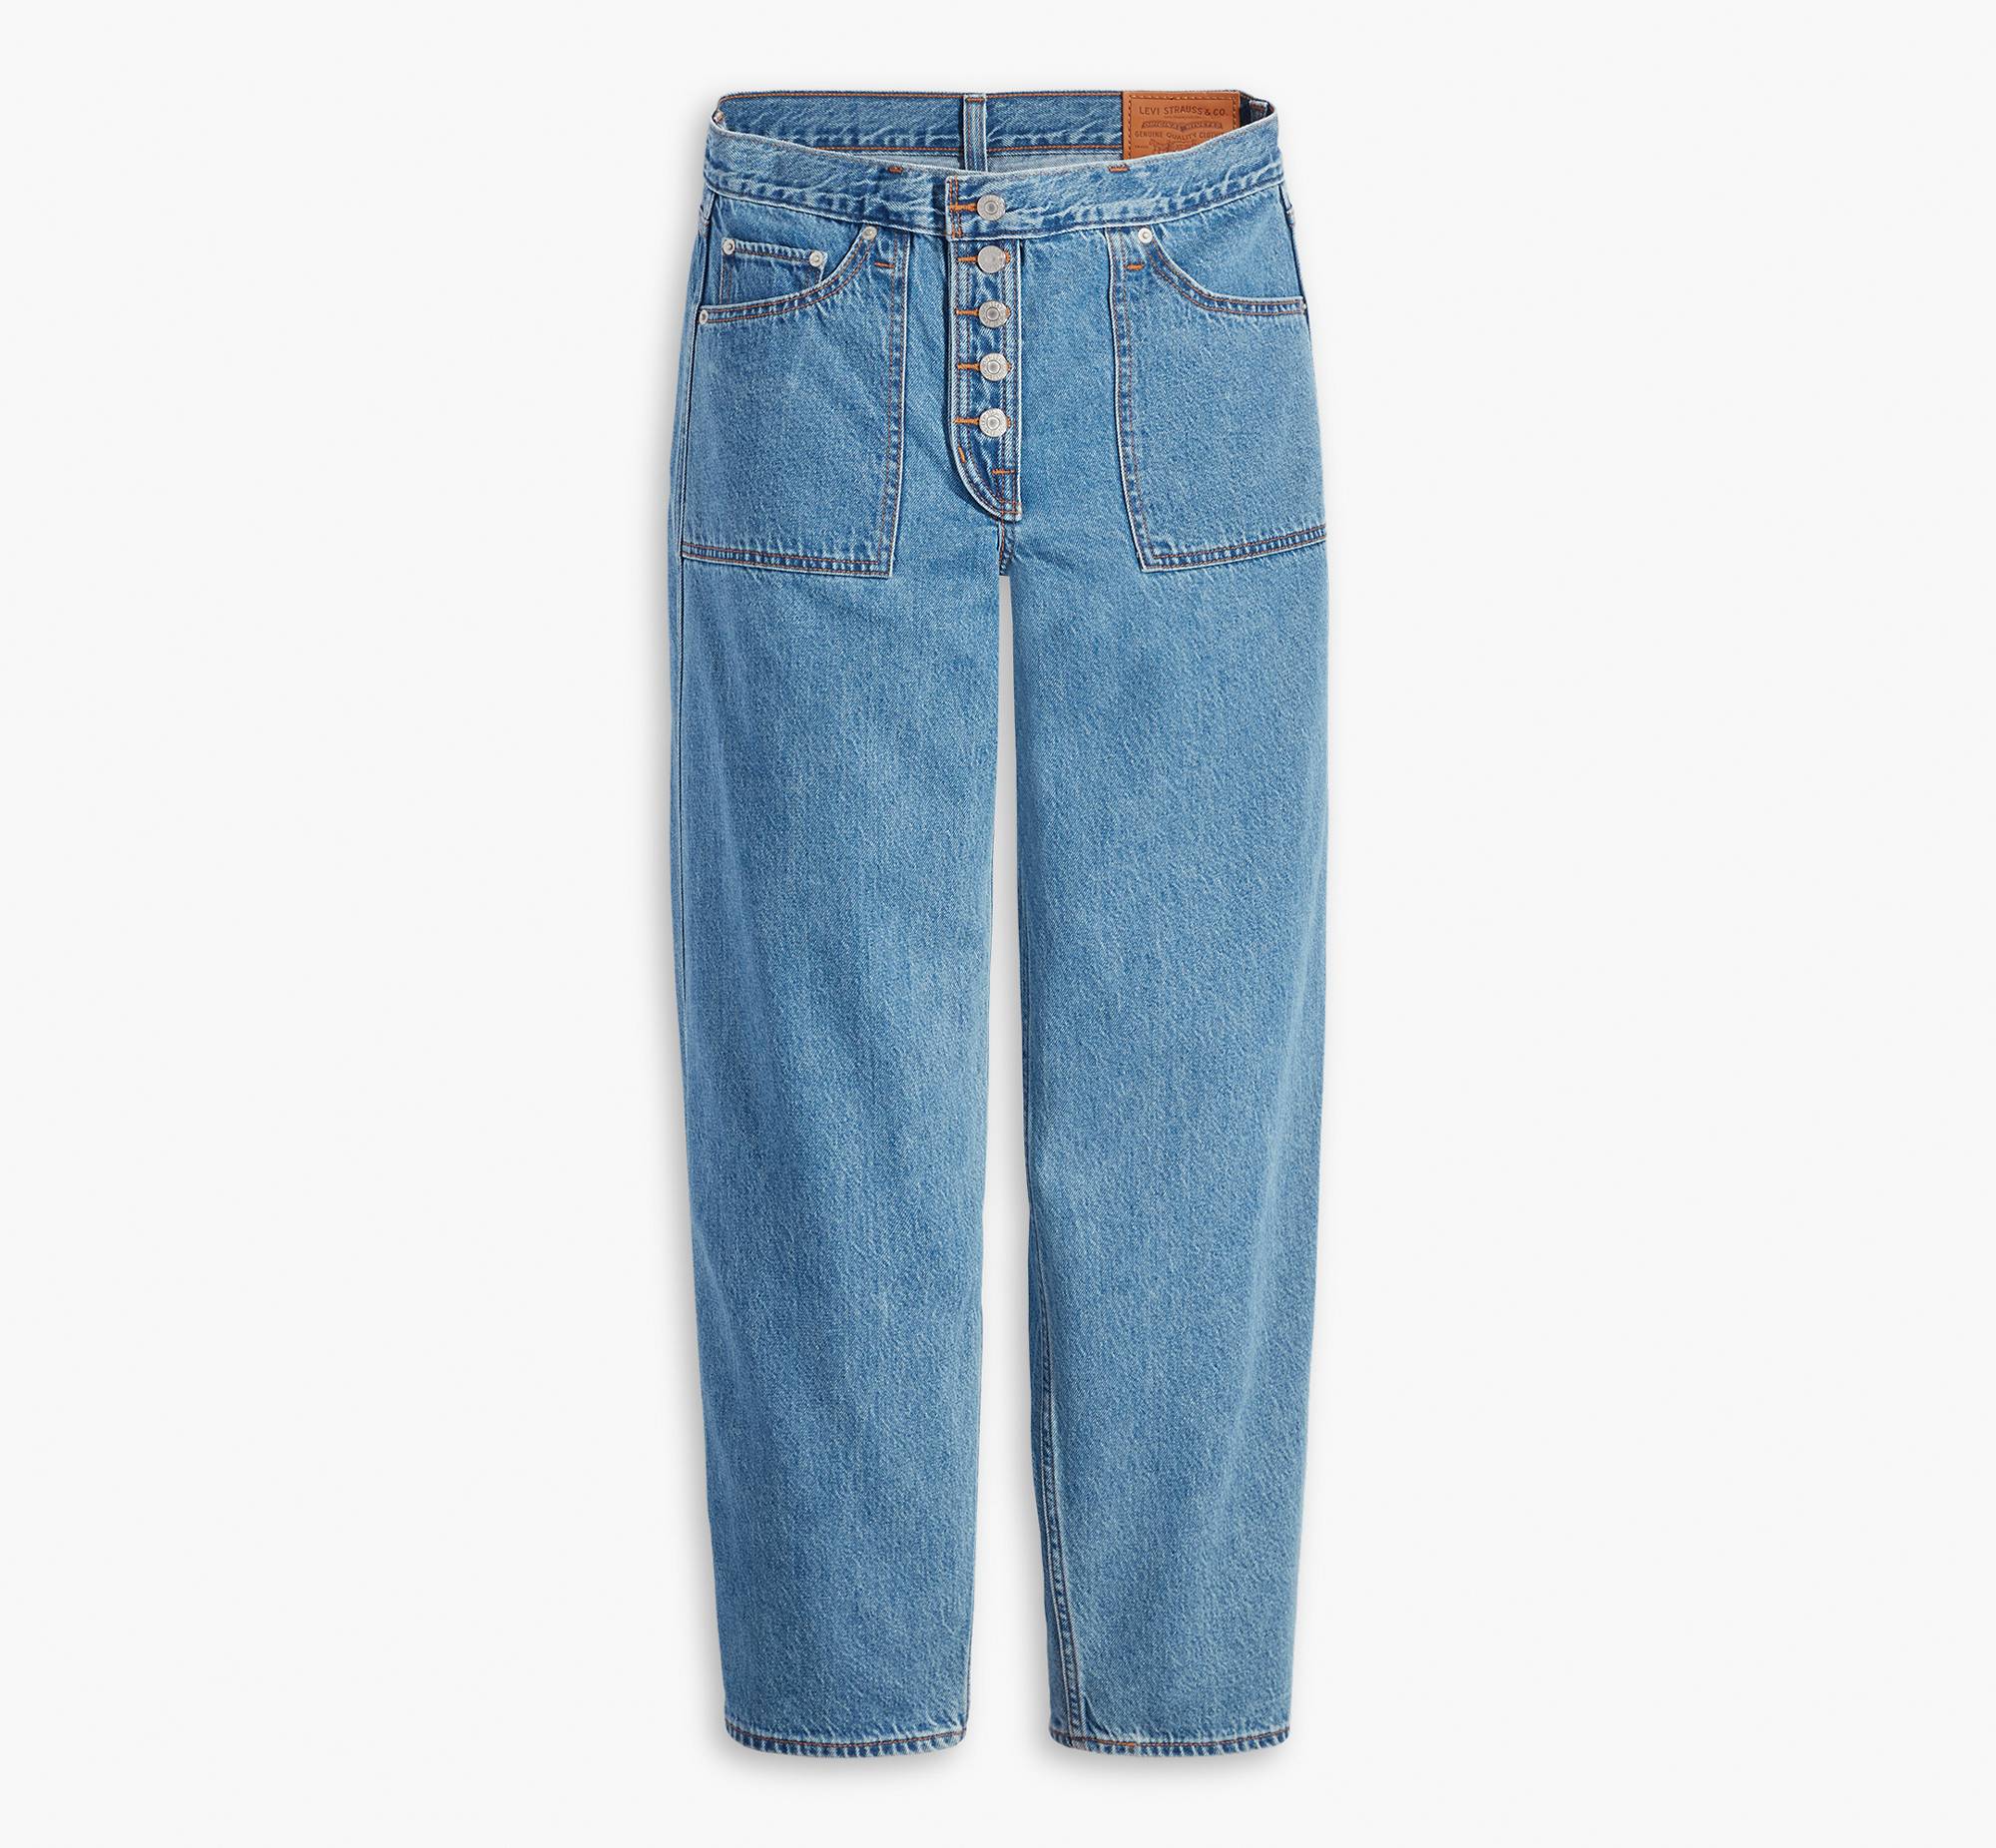 Reversible Baggy Dad Jeans 7